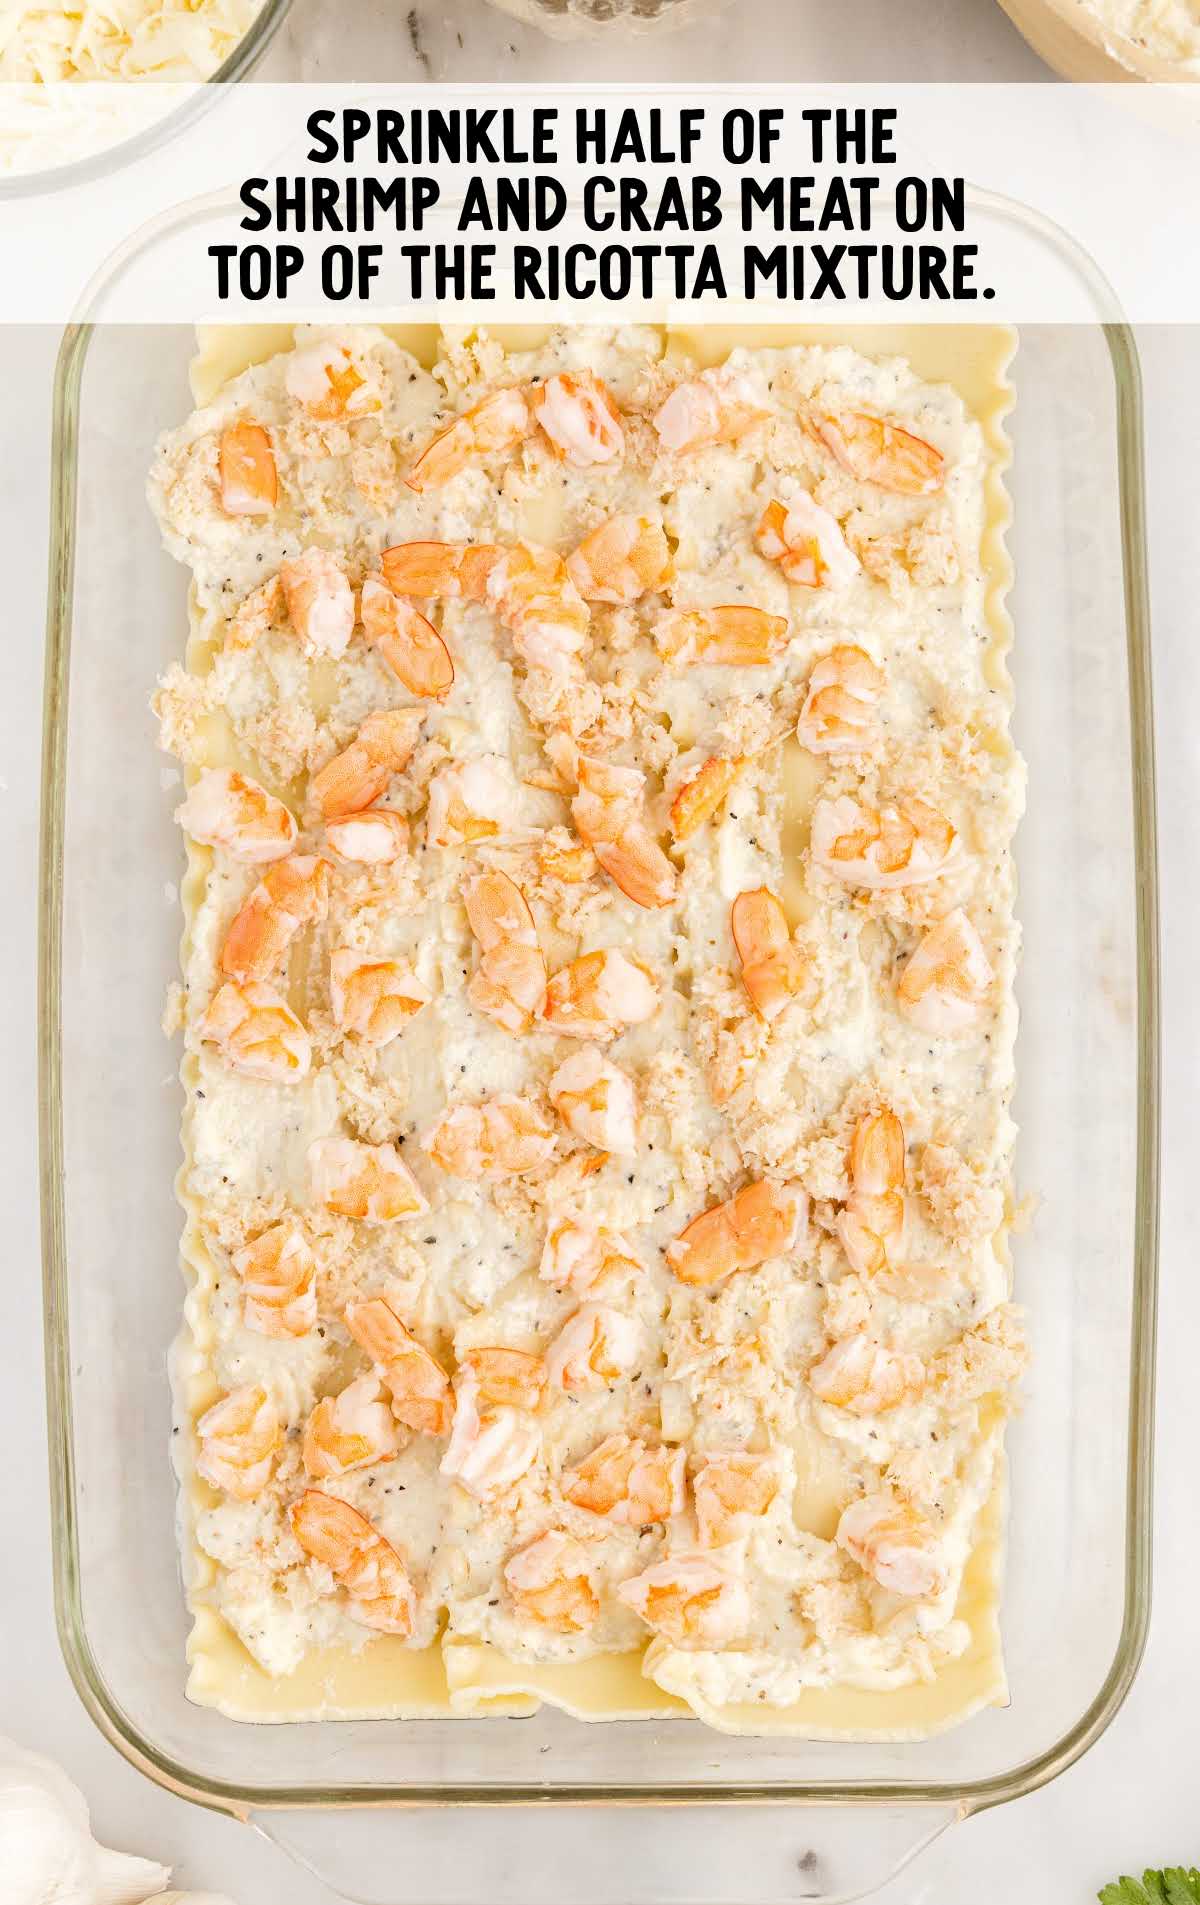 shrimp and crabs sprinkled on top of the ricotta mixture